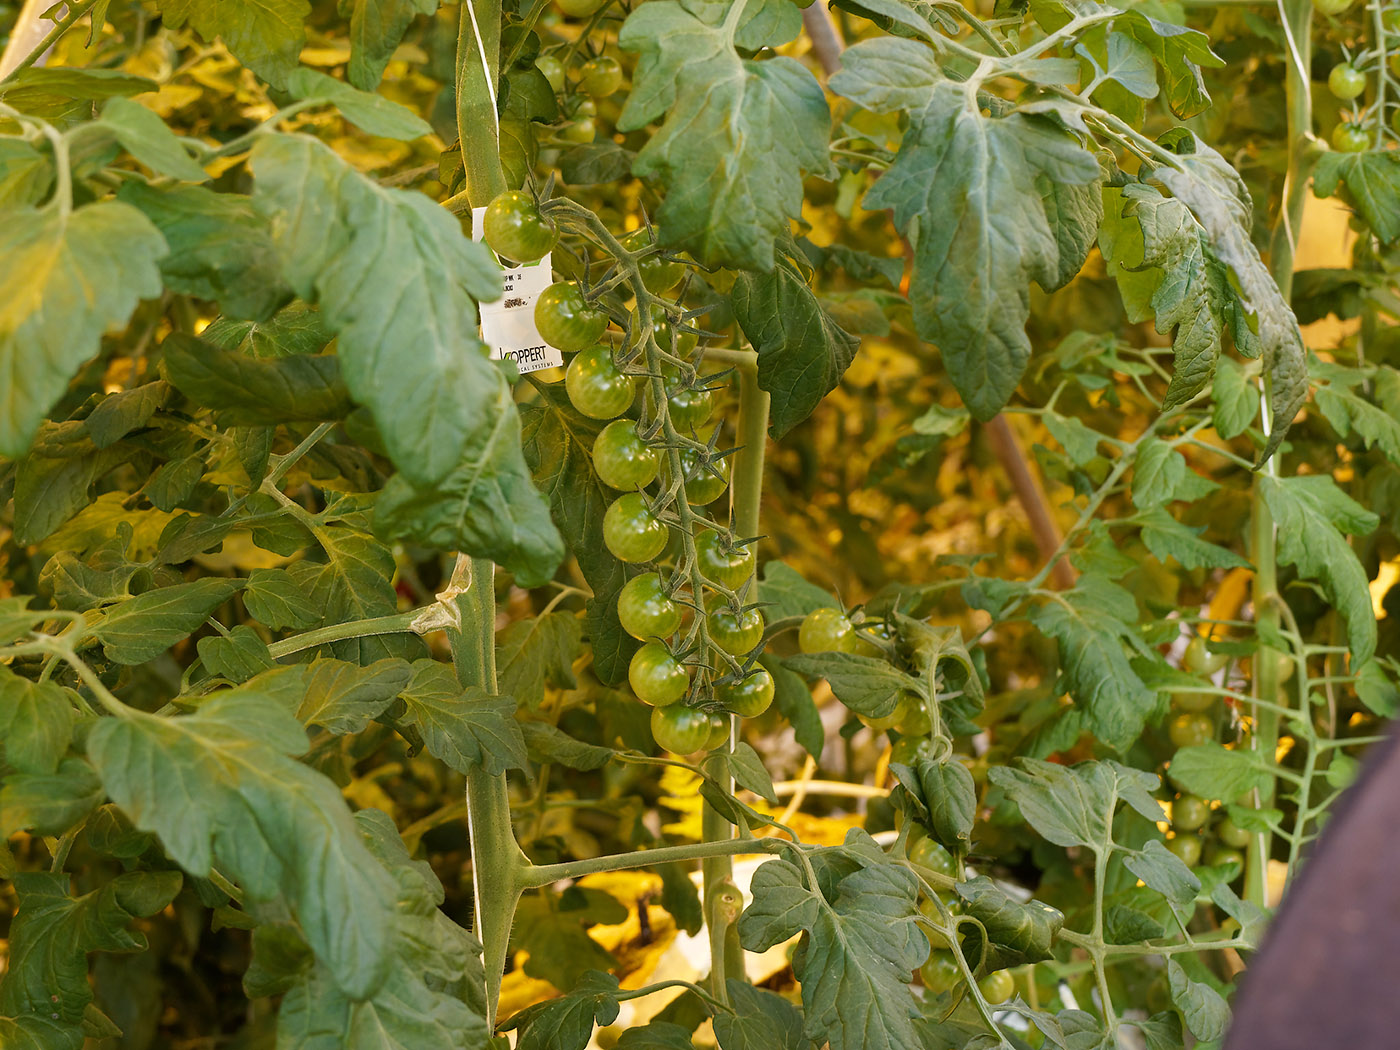 Cherry tomatoes approaching ripeness for harvest.